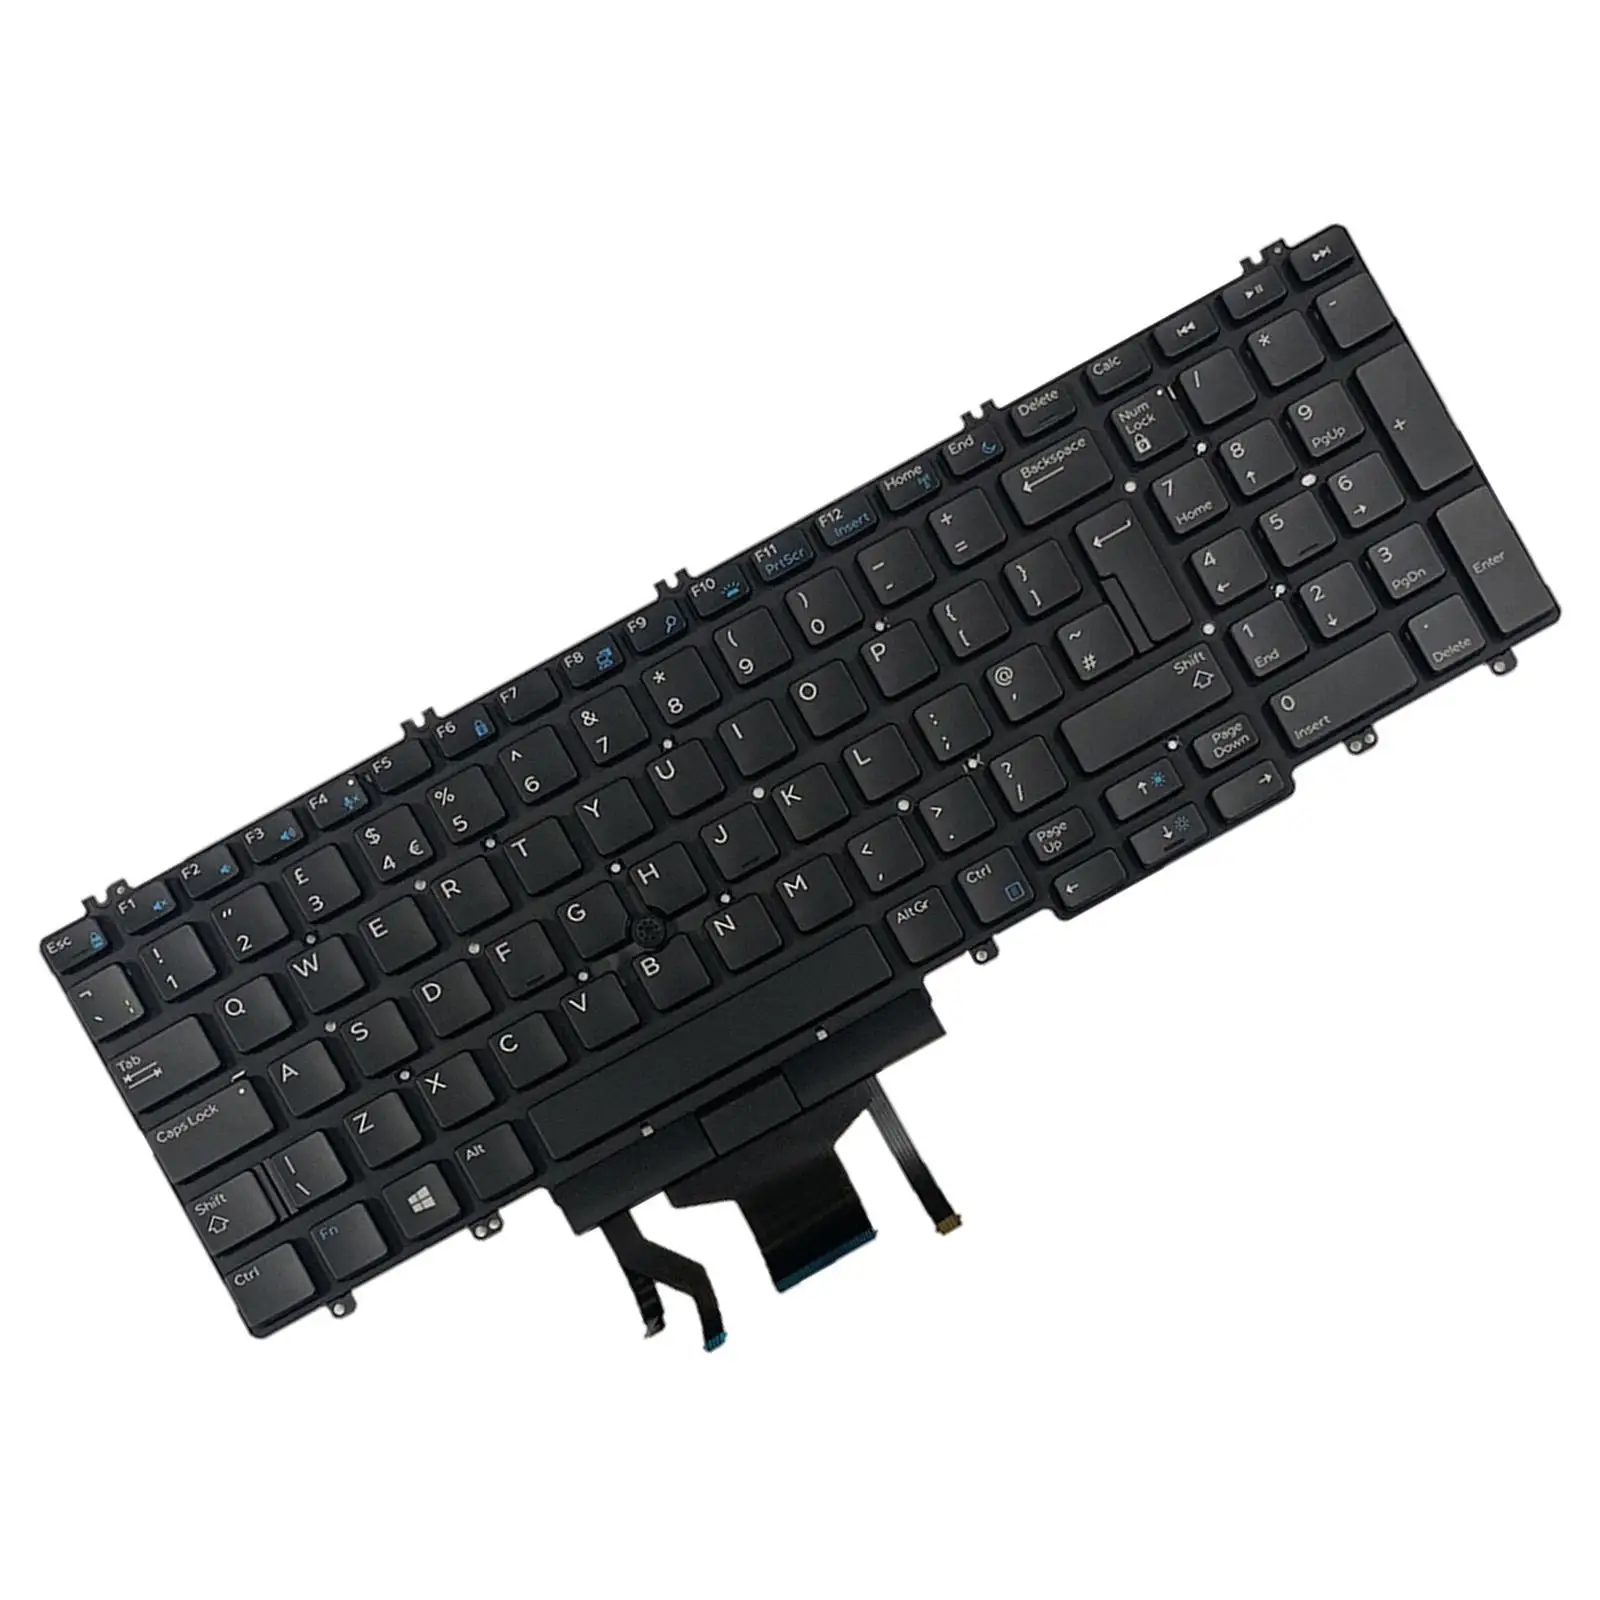 Laptop Keyboard with Bakclit Replacement for Dell Precision 3530 7530 7730 E7530 M7530 Professional Accessories Durable No Frame